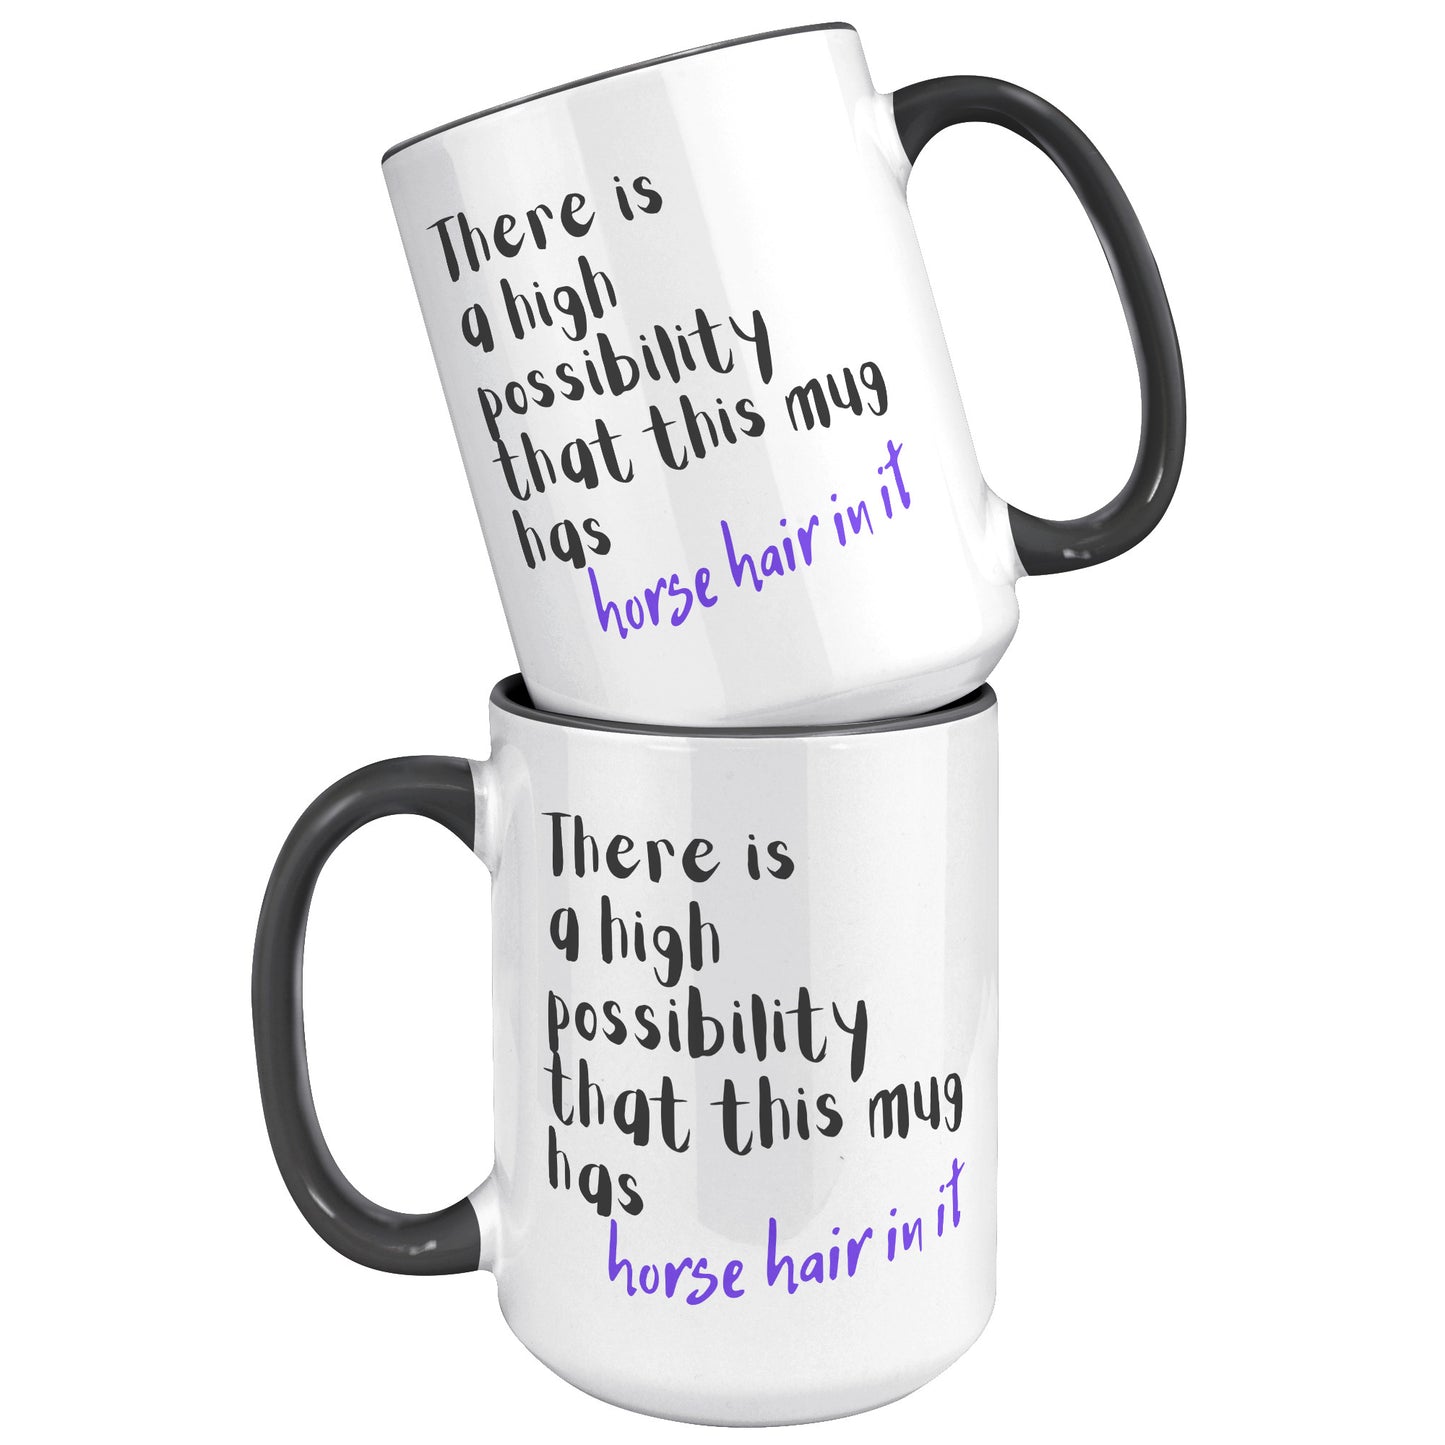 Comical Mug for the Horse Lover that also Loves Coffee as Well